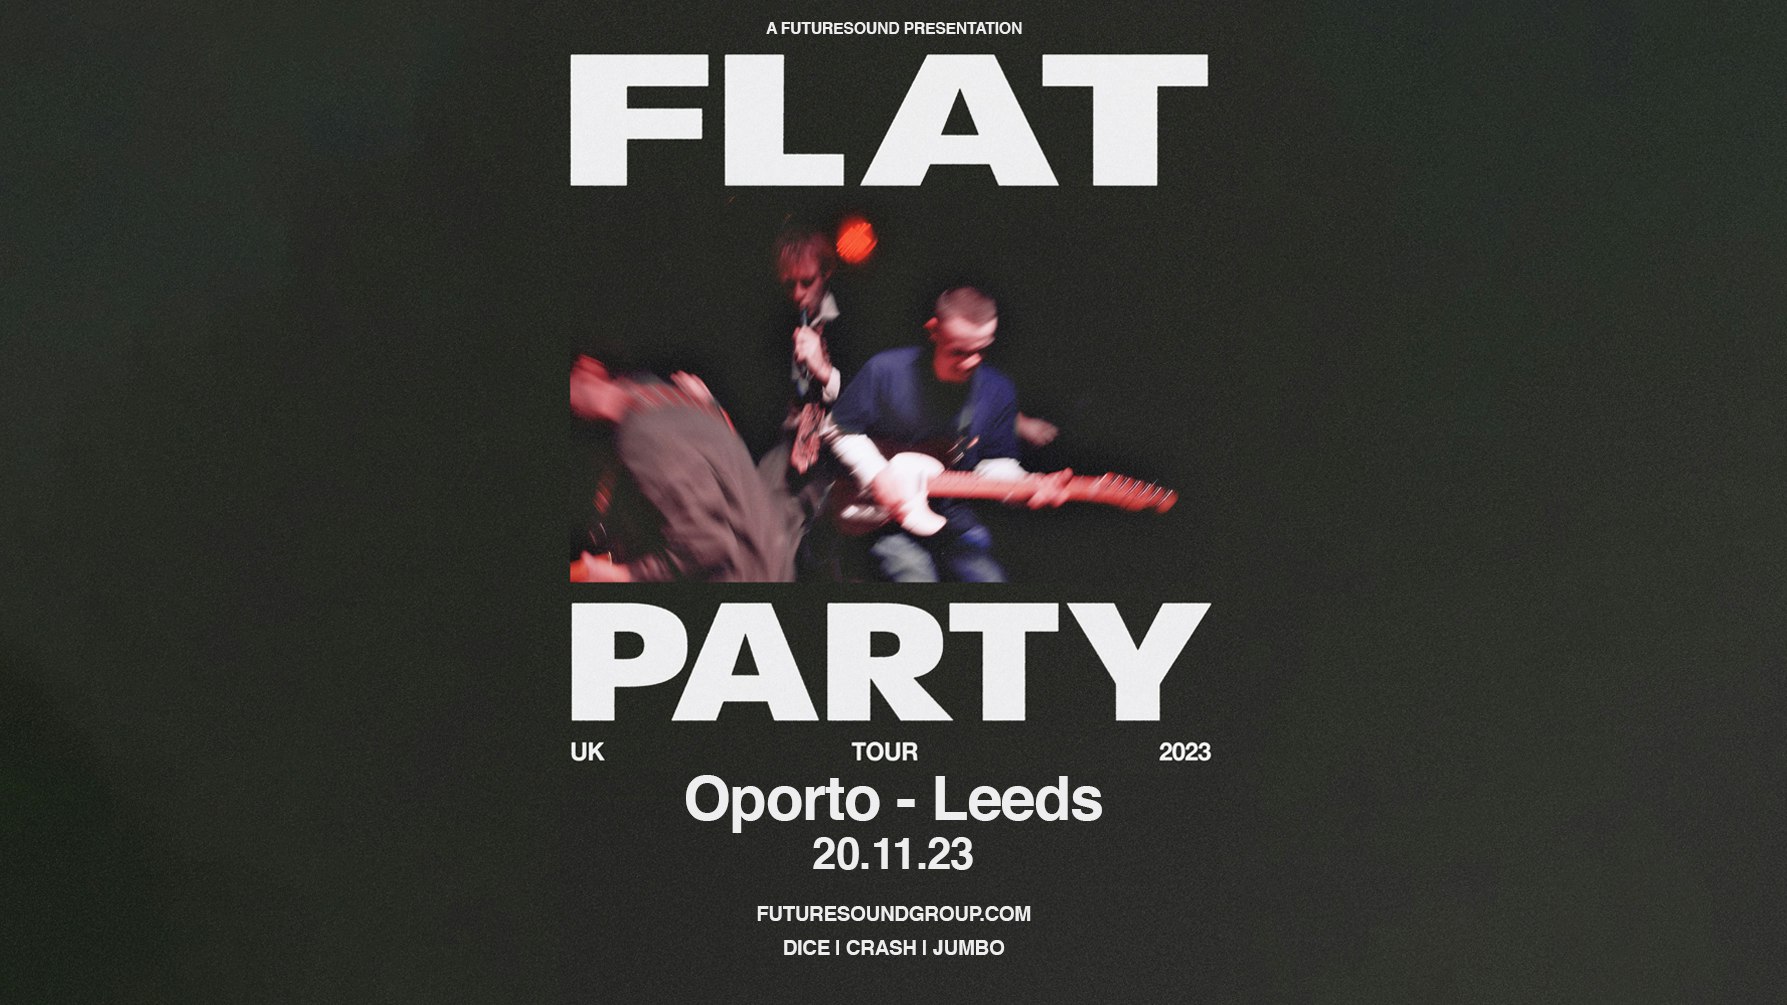 Flat Party